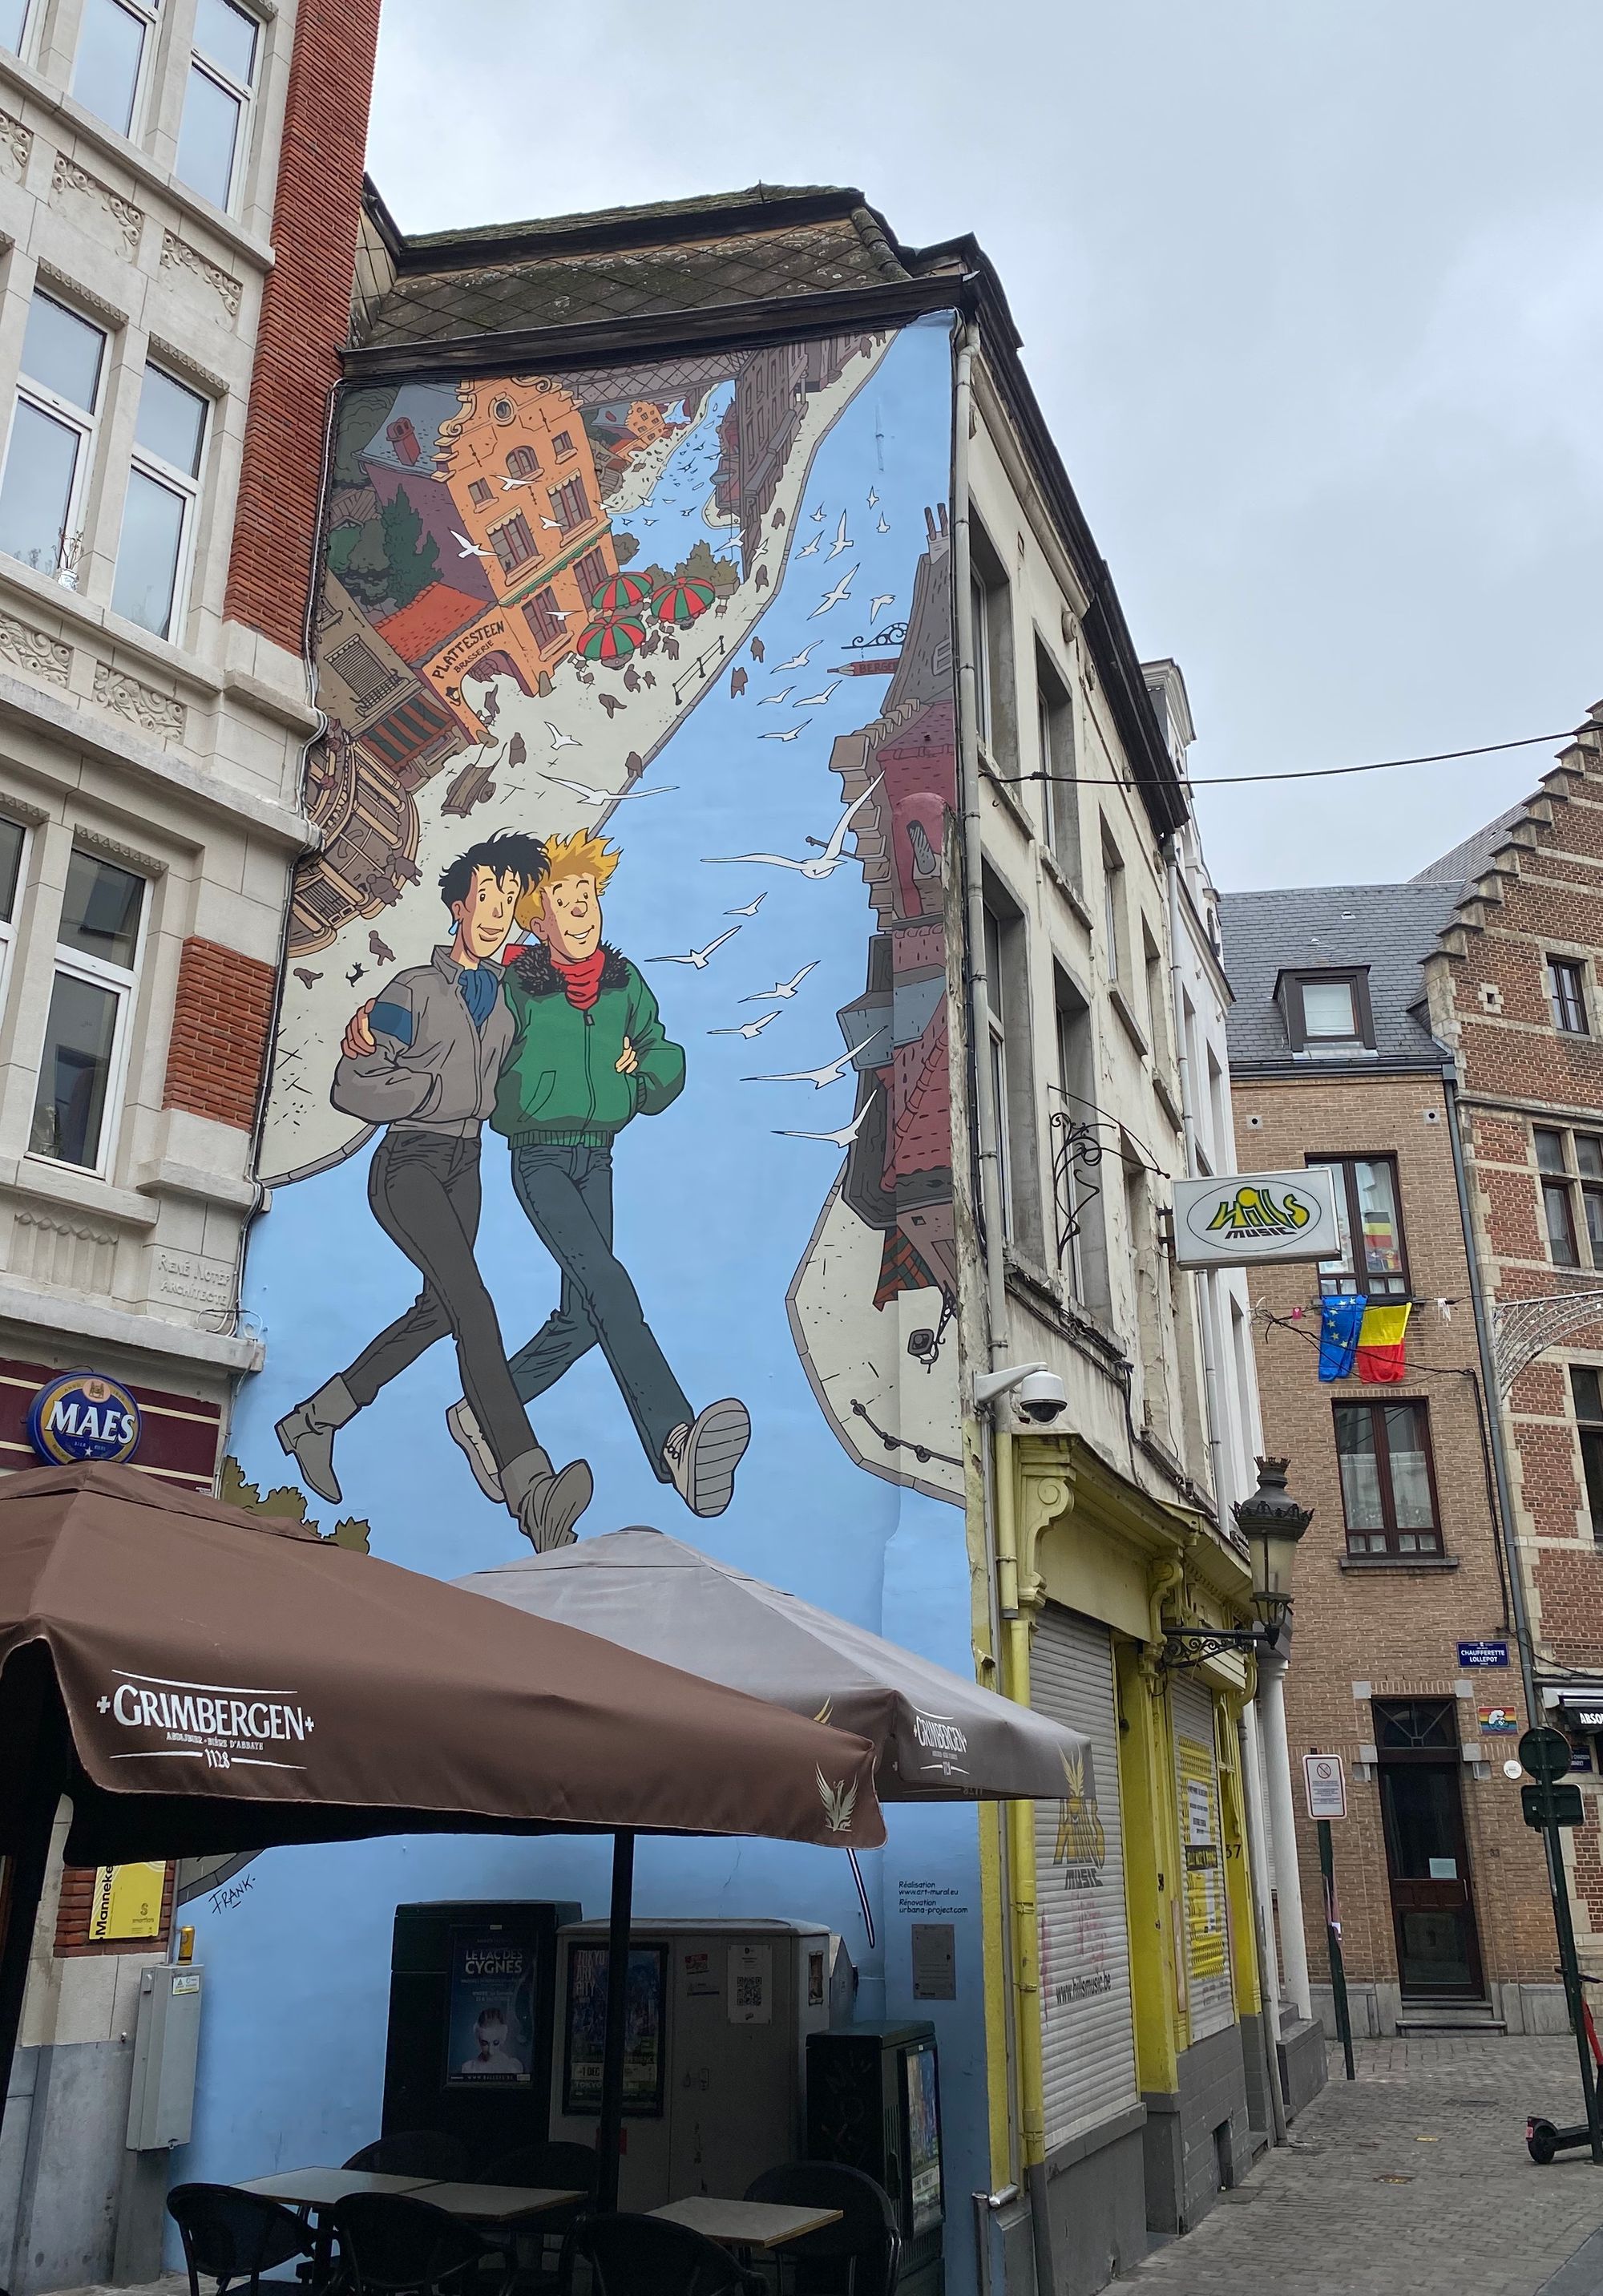 The side of a building which has been painted as cartoon-style street art. The street art shows two people with short hair hugging as they walk along. In front of the street art there is an umbrella outside a bar, with tables and chairs underneath